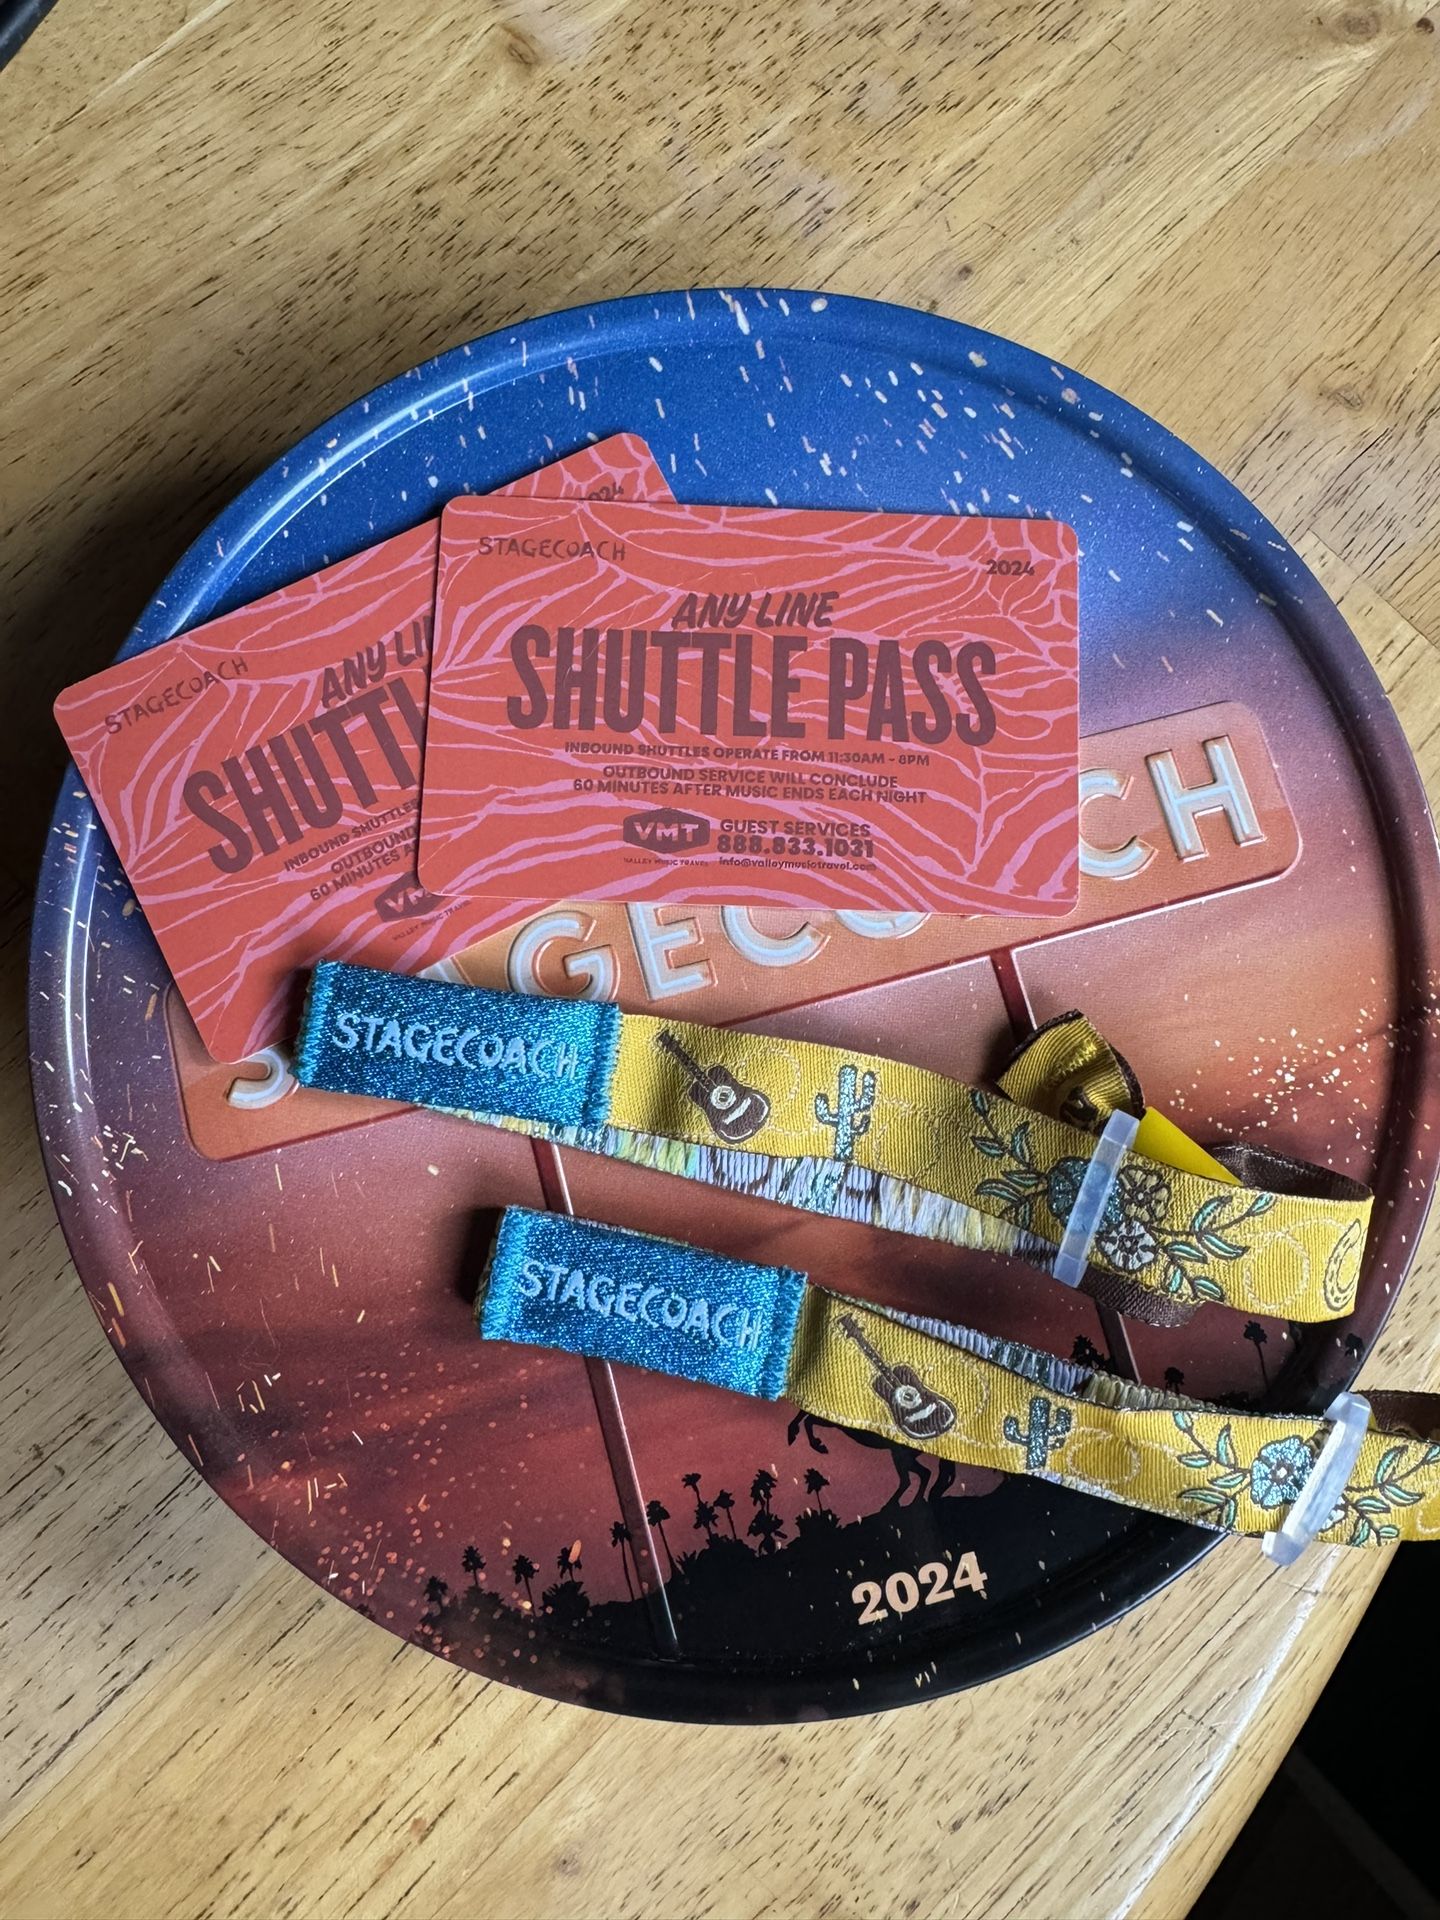 2 Stagecoach Passes W/ Shuttle Passes OBO